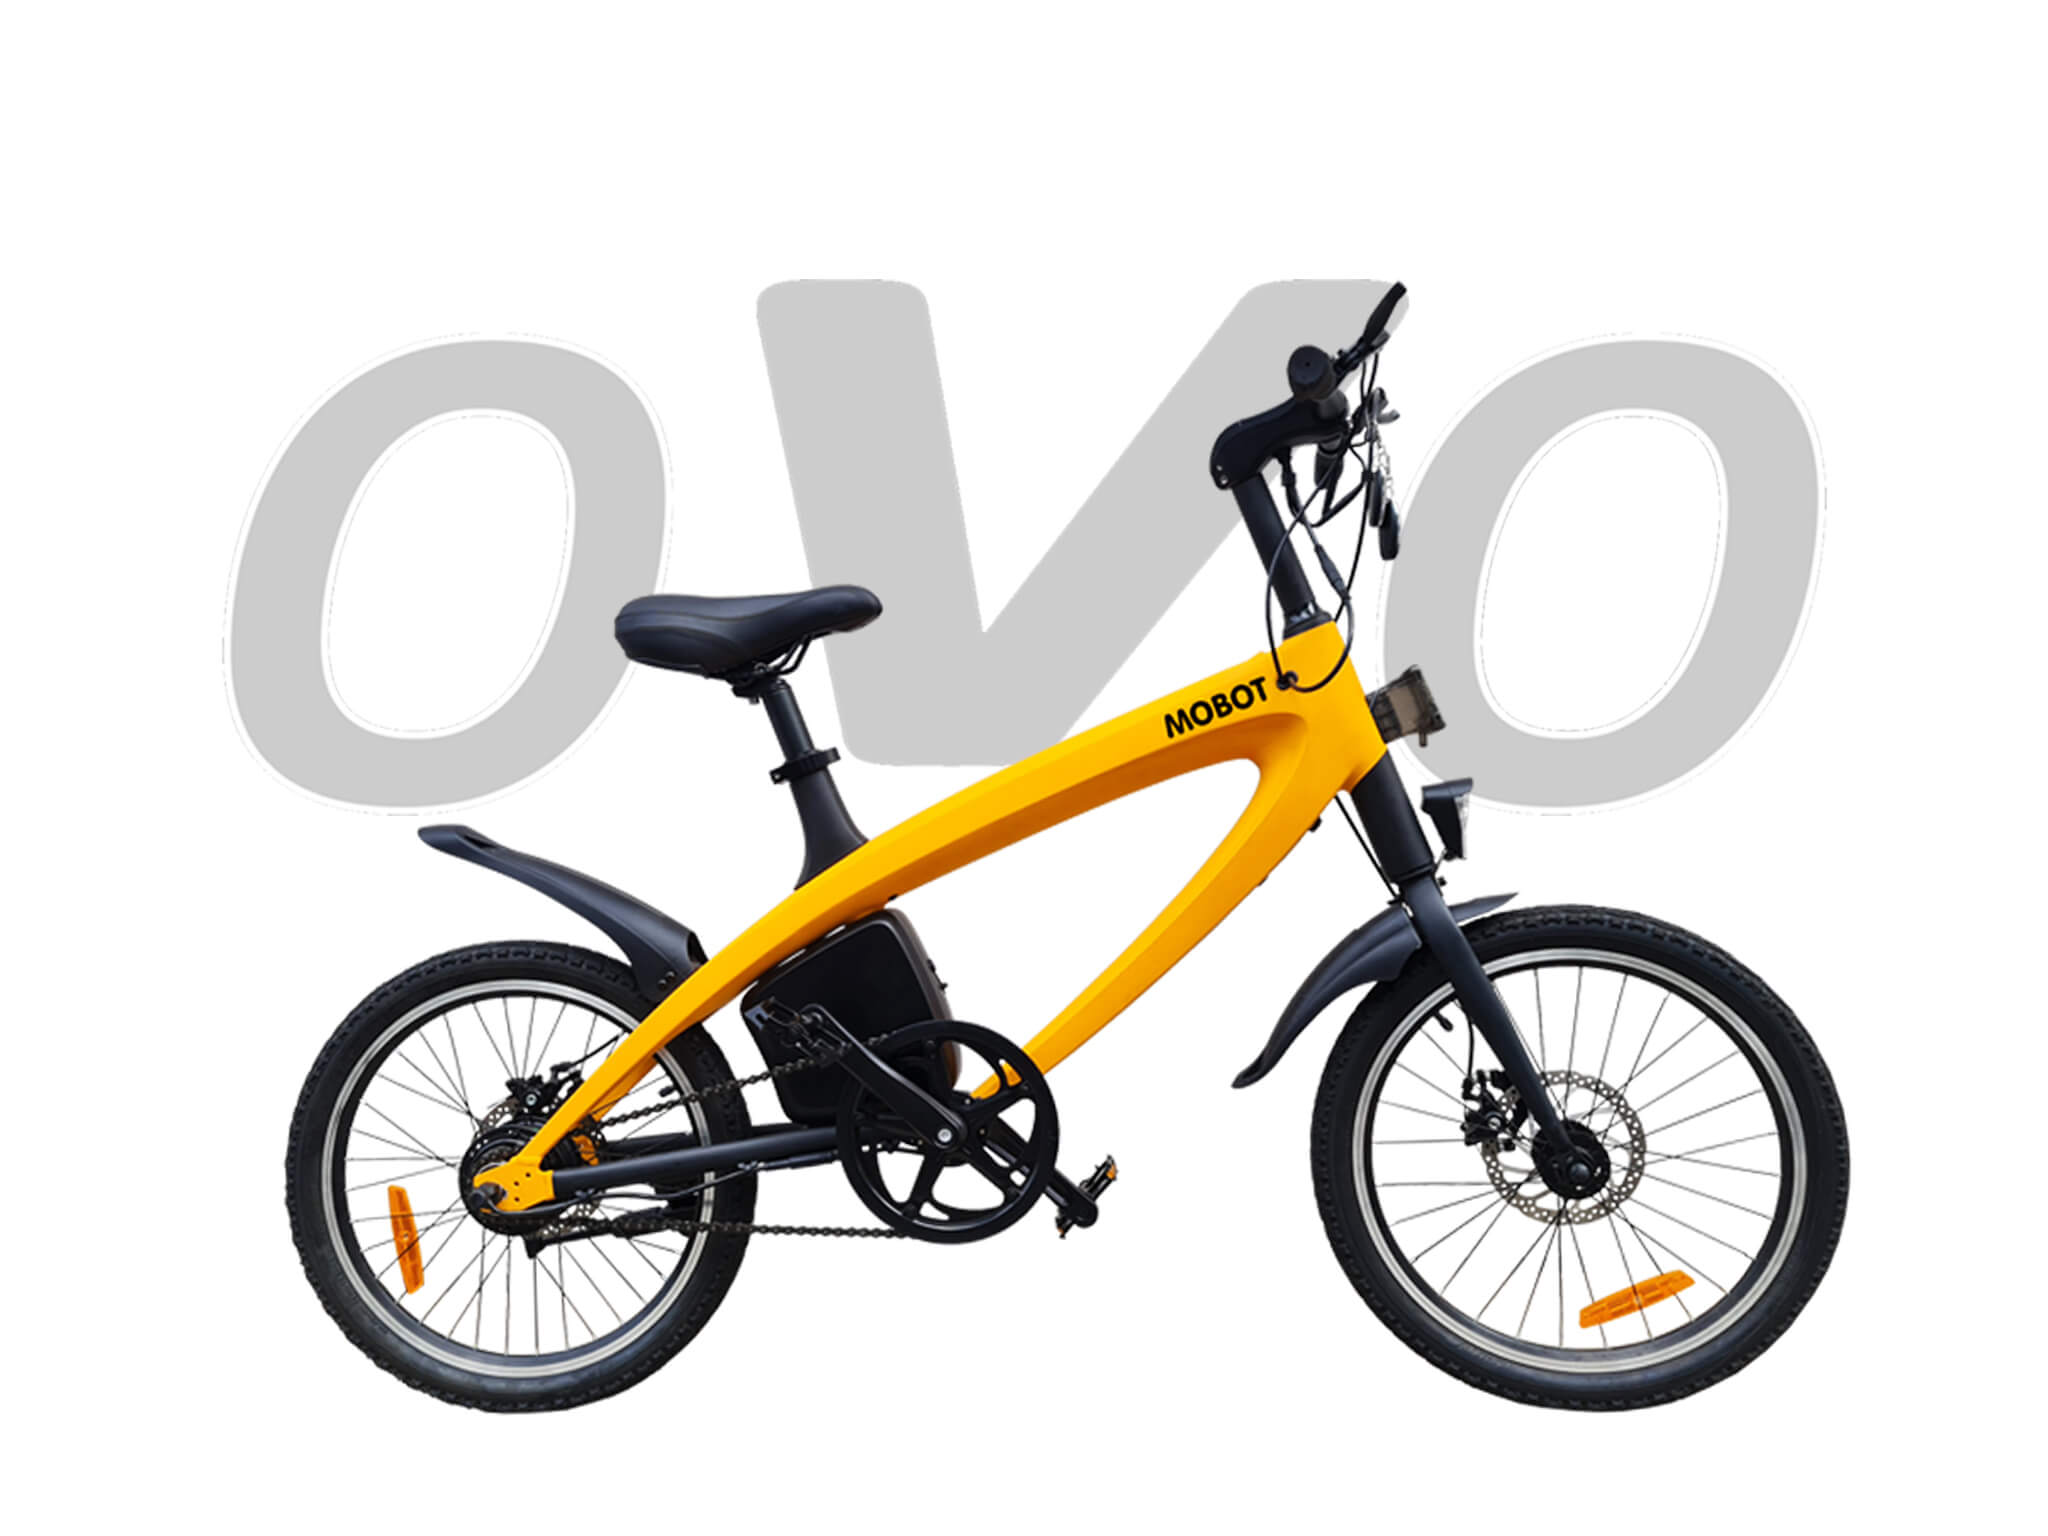 MOBOT OVO electric bicycle receives LTA PAB type approval